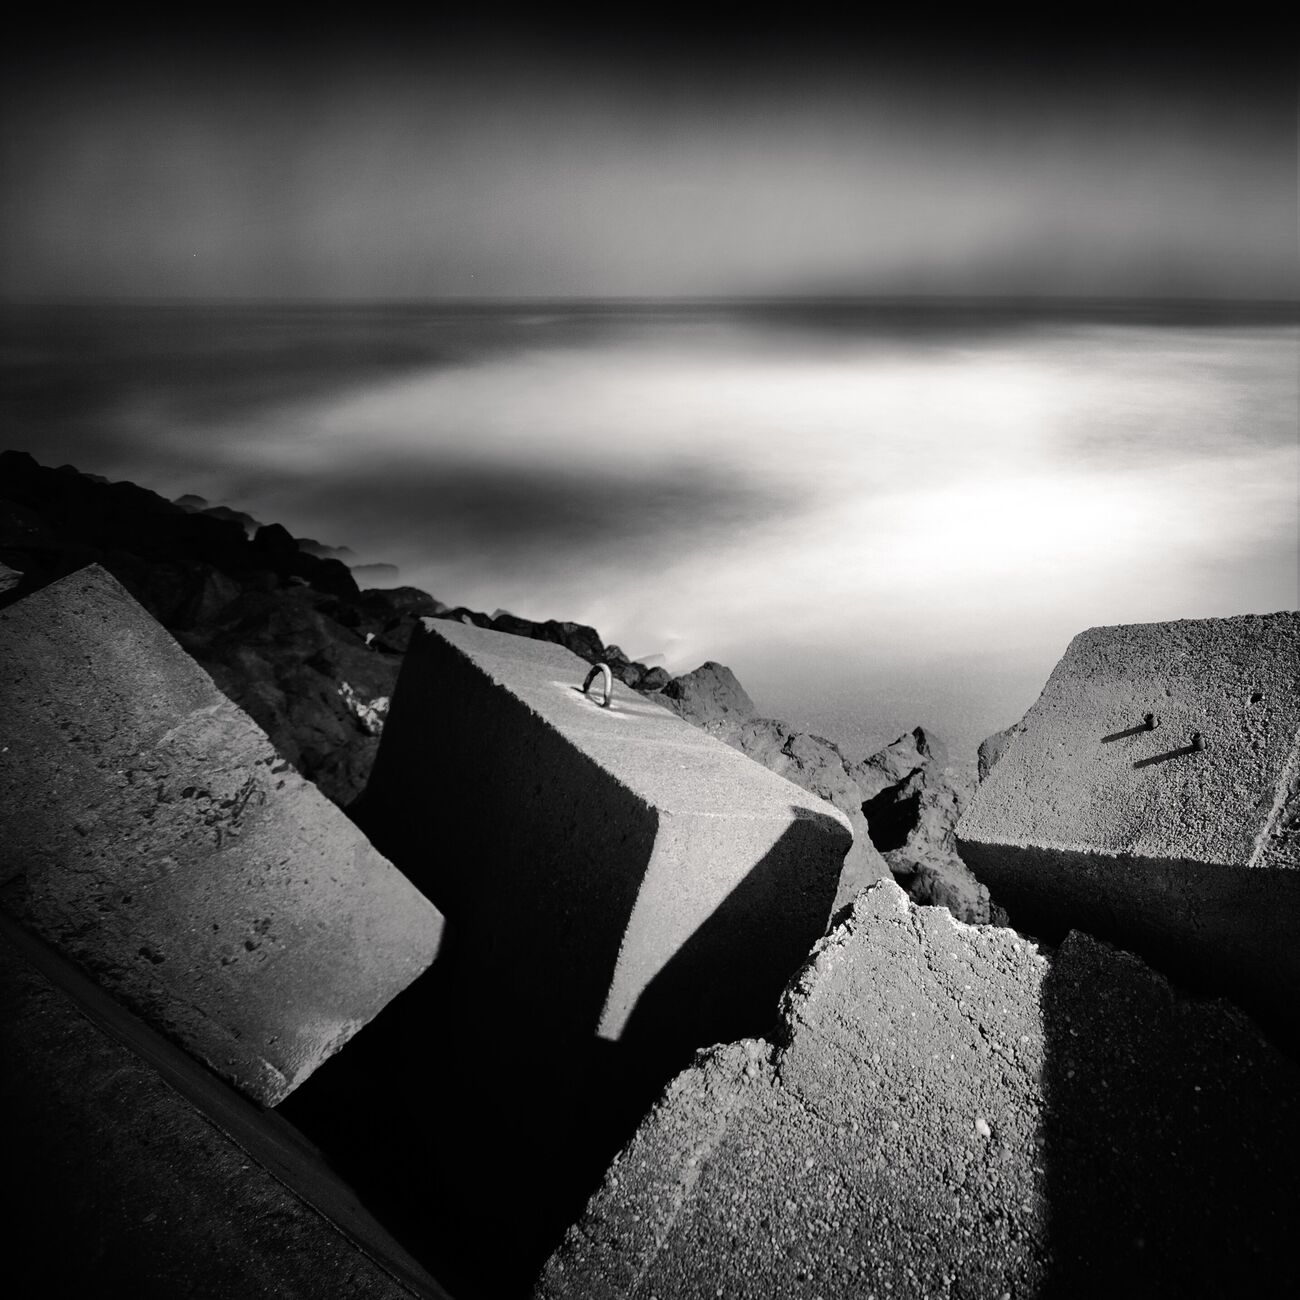 Photography 17.7 x 17.7 in, Concrete in stormy ocean. Ref-1364-4 - Denis Olivier Art Photography